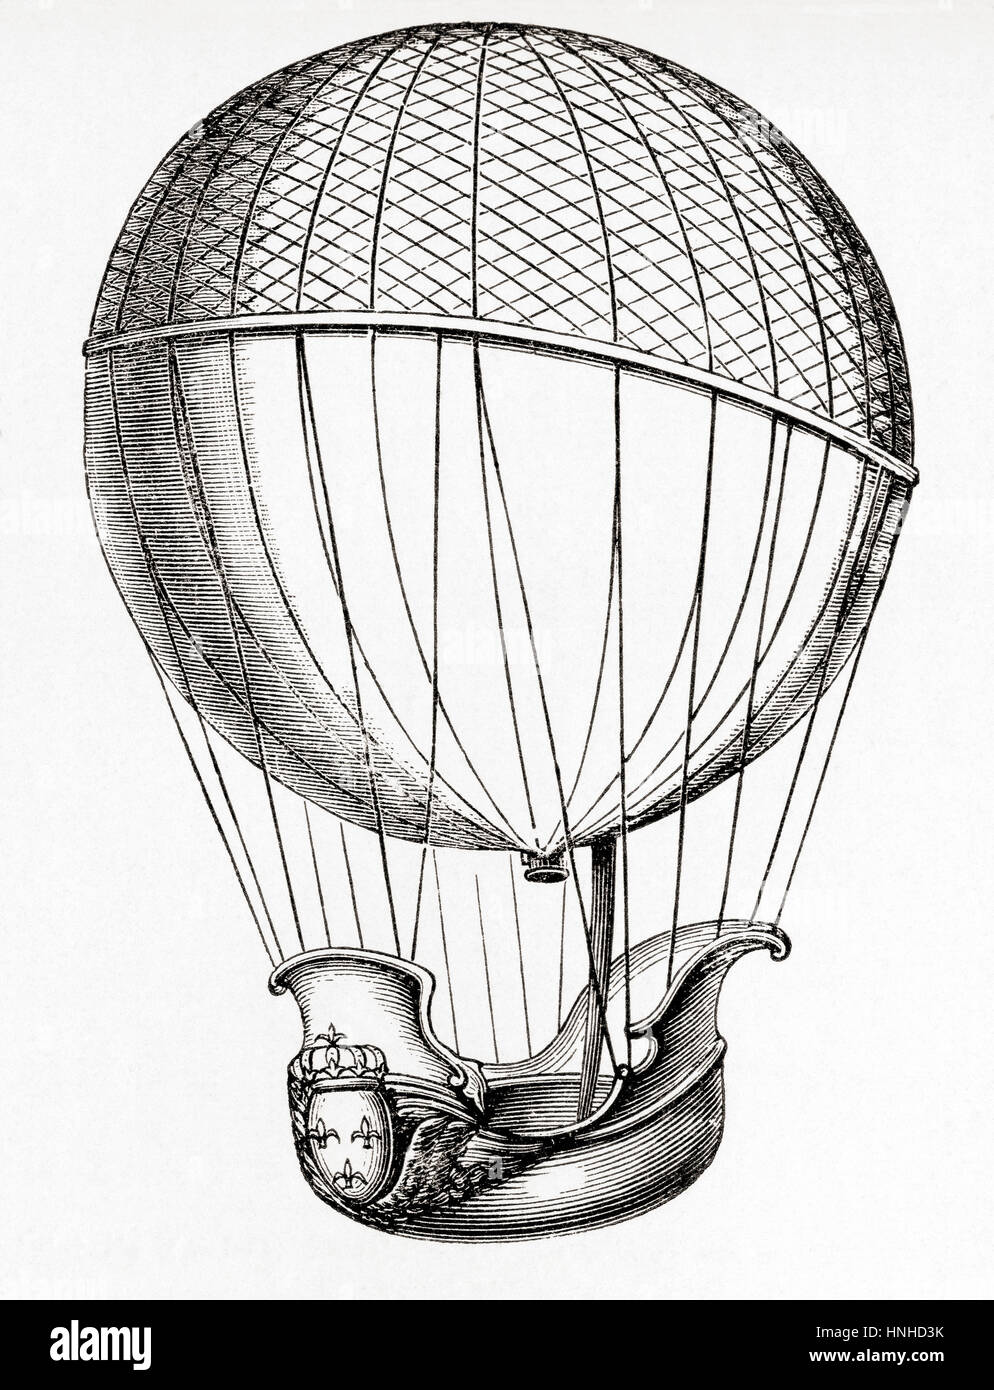 The first manned hydrogen balloon flown by Professor Jacques Charles and Nicolas-Louis Robert at the Jardin des Tuileries, Paris, France in 1783.    From Meyers Lexicon, published 1927. Stock Photo